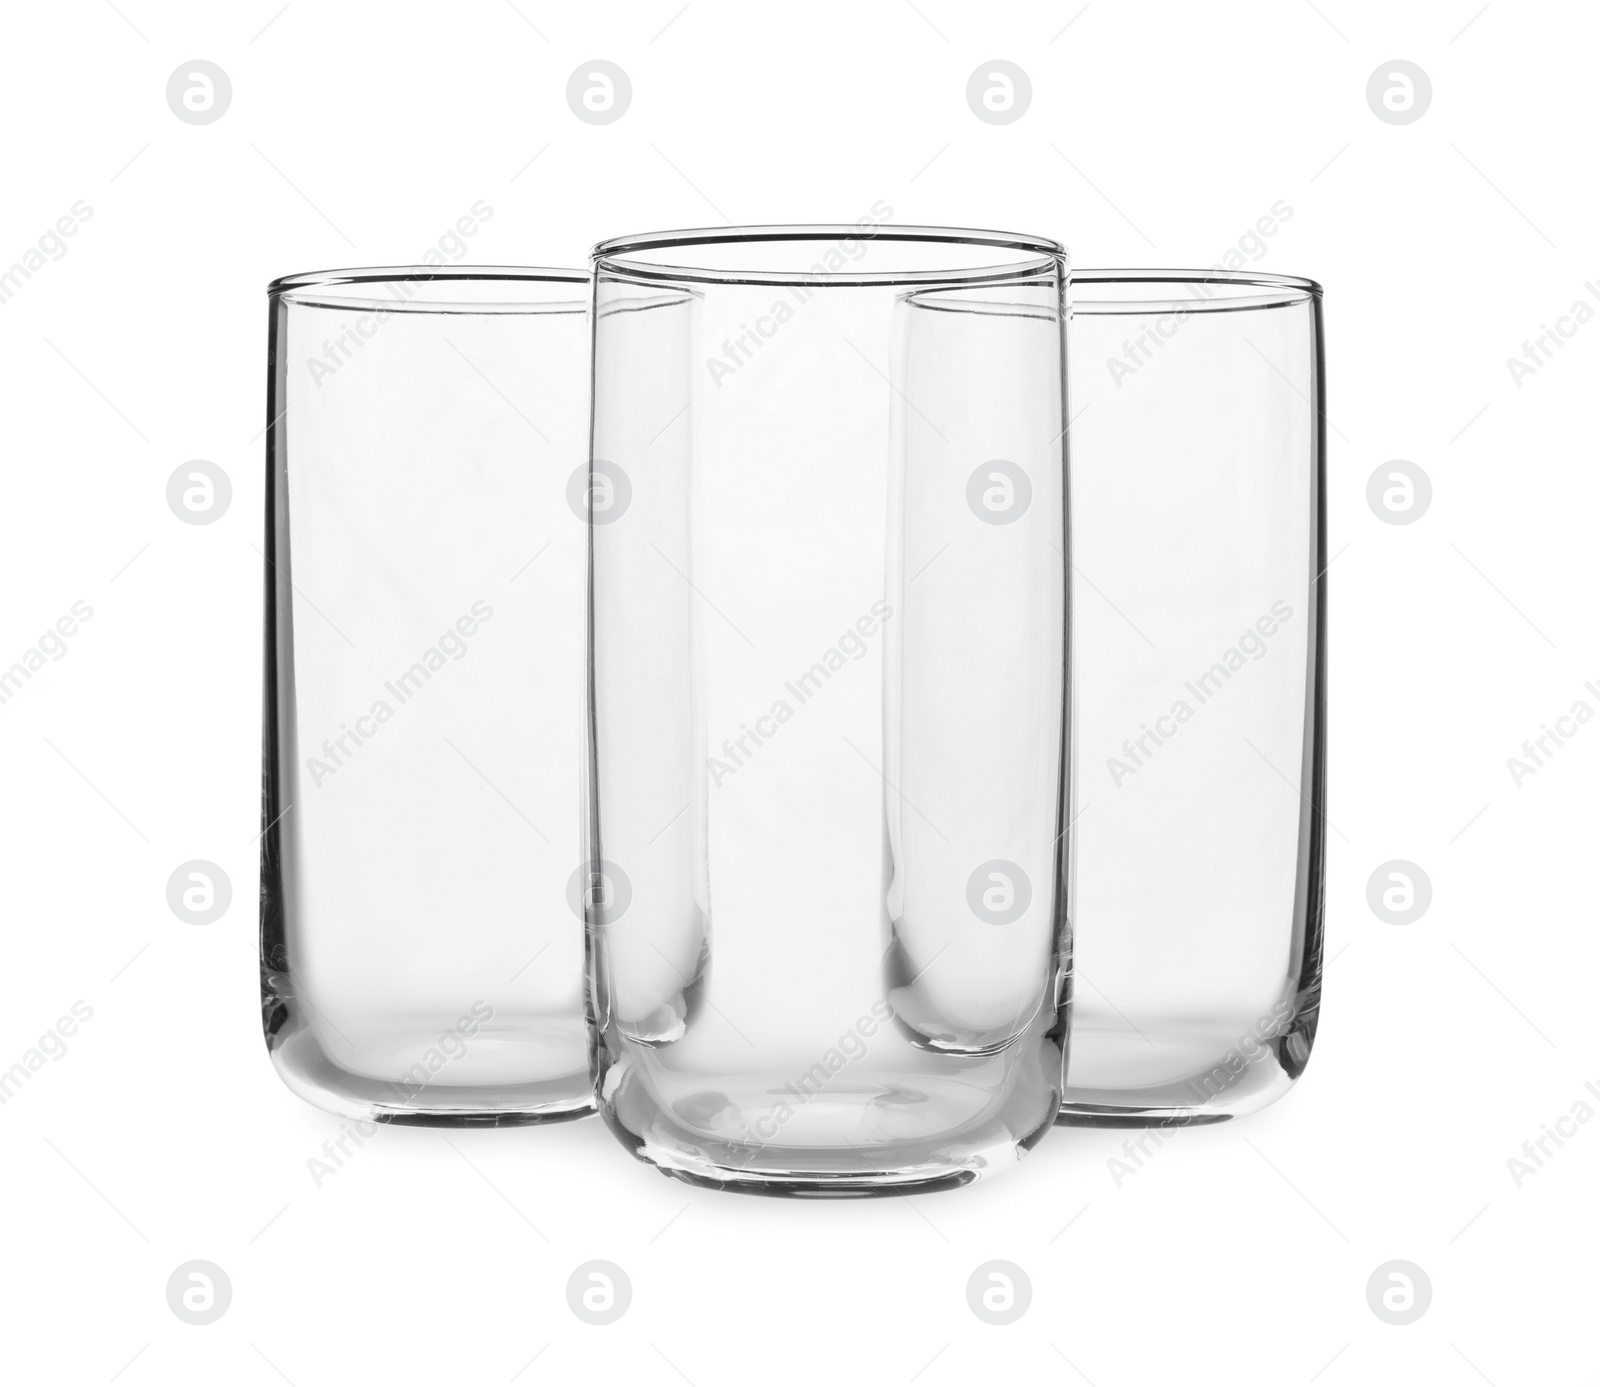 Photo of New clean empty glasses on white background